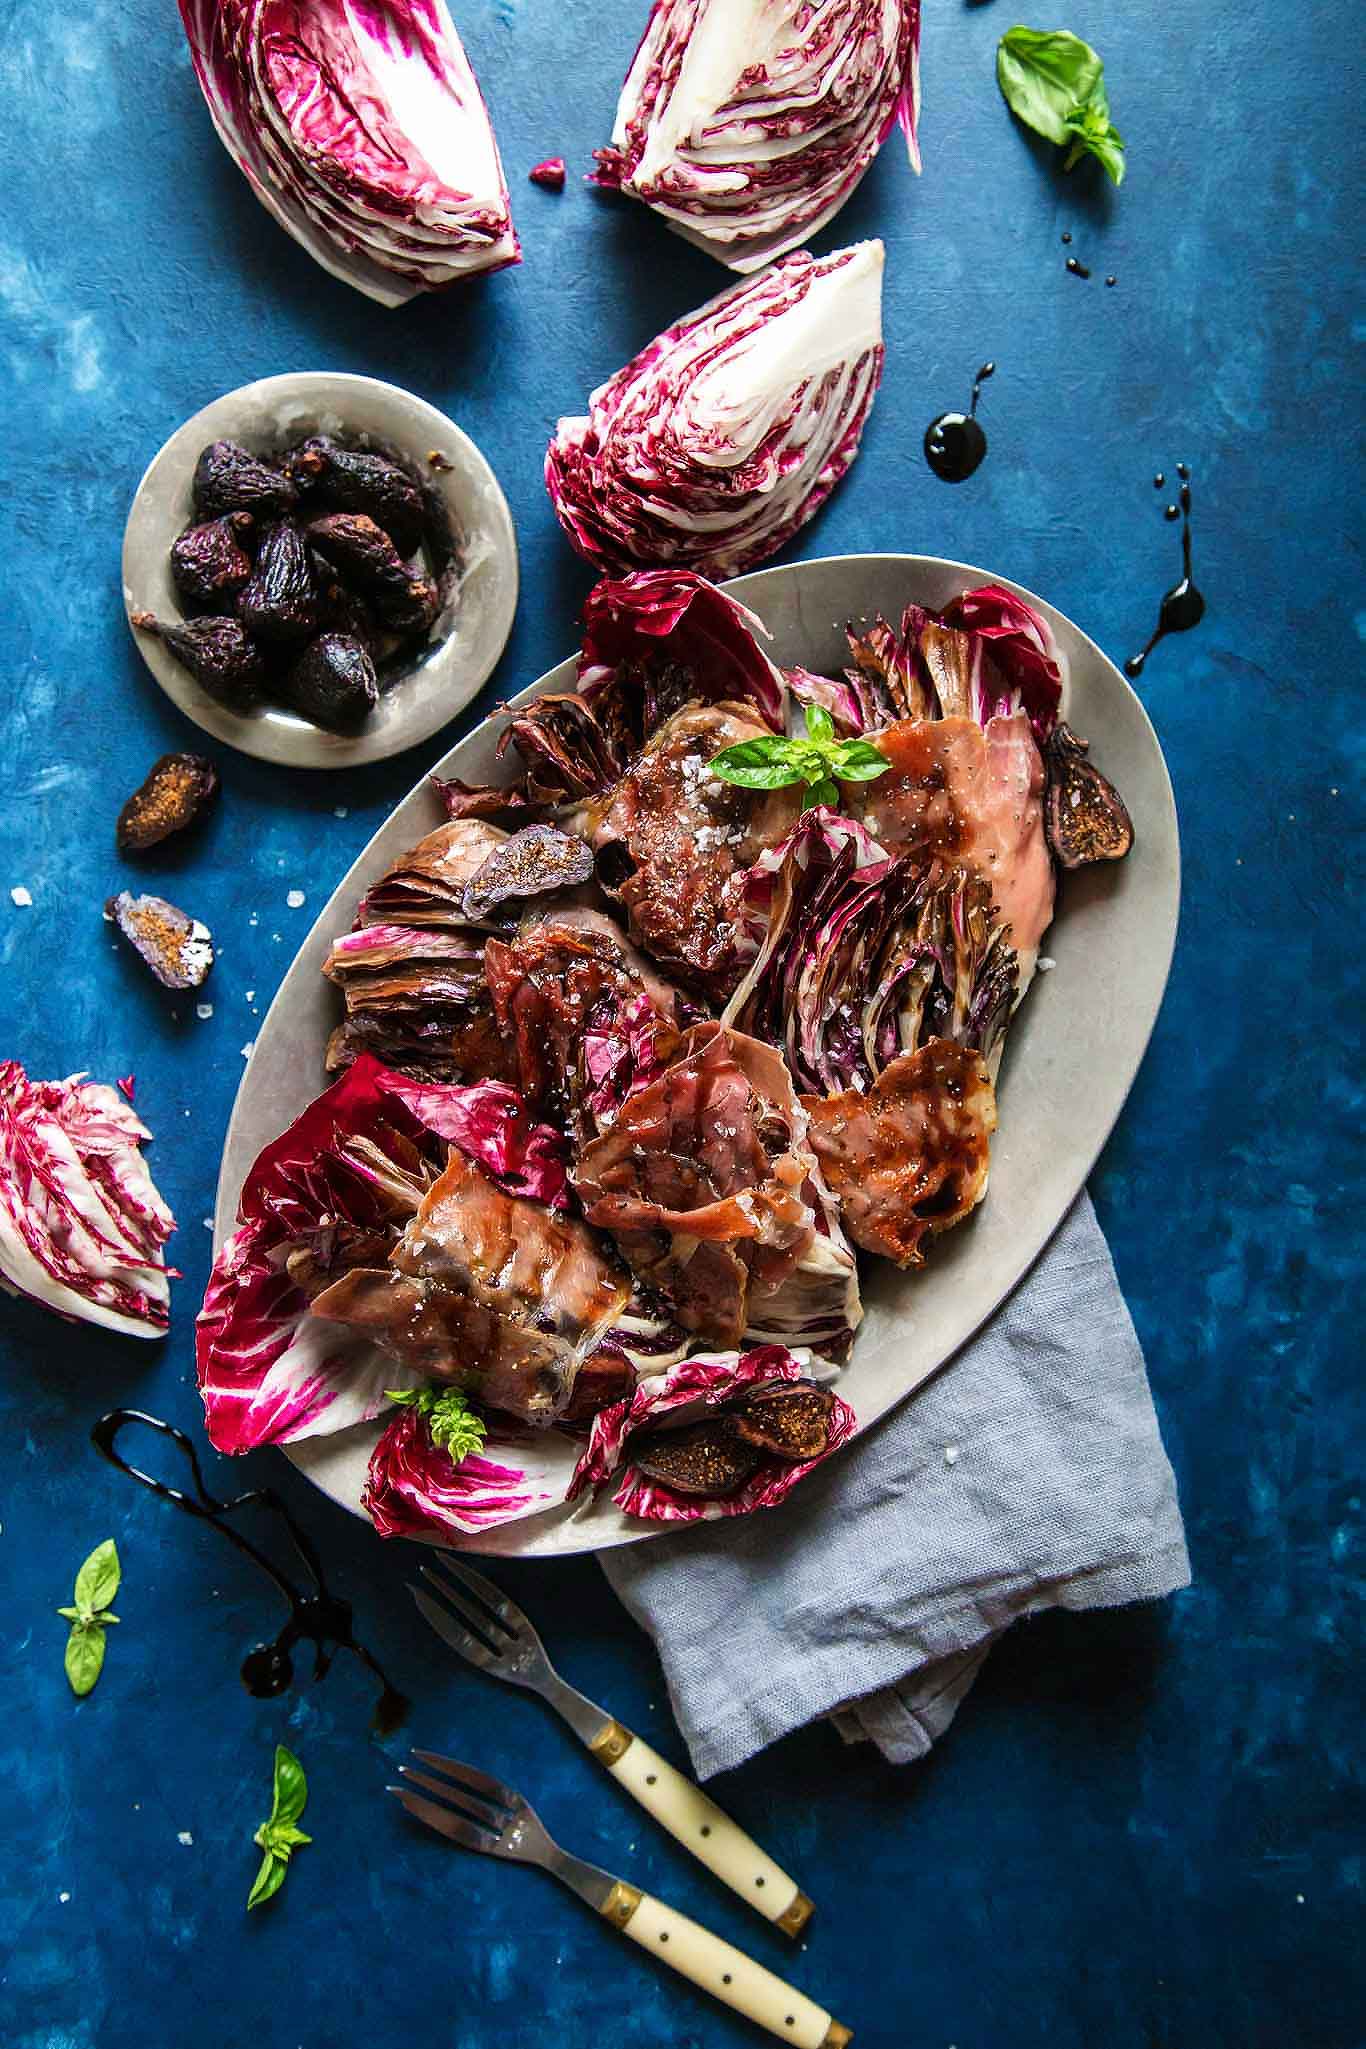 Up close platter of grilled radicchio with balsamic glaze.